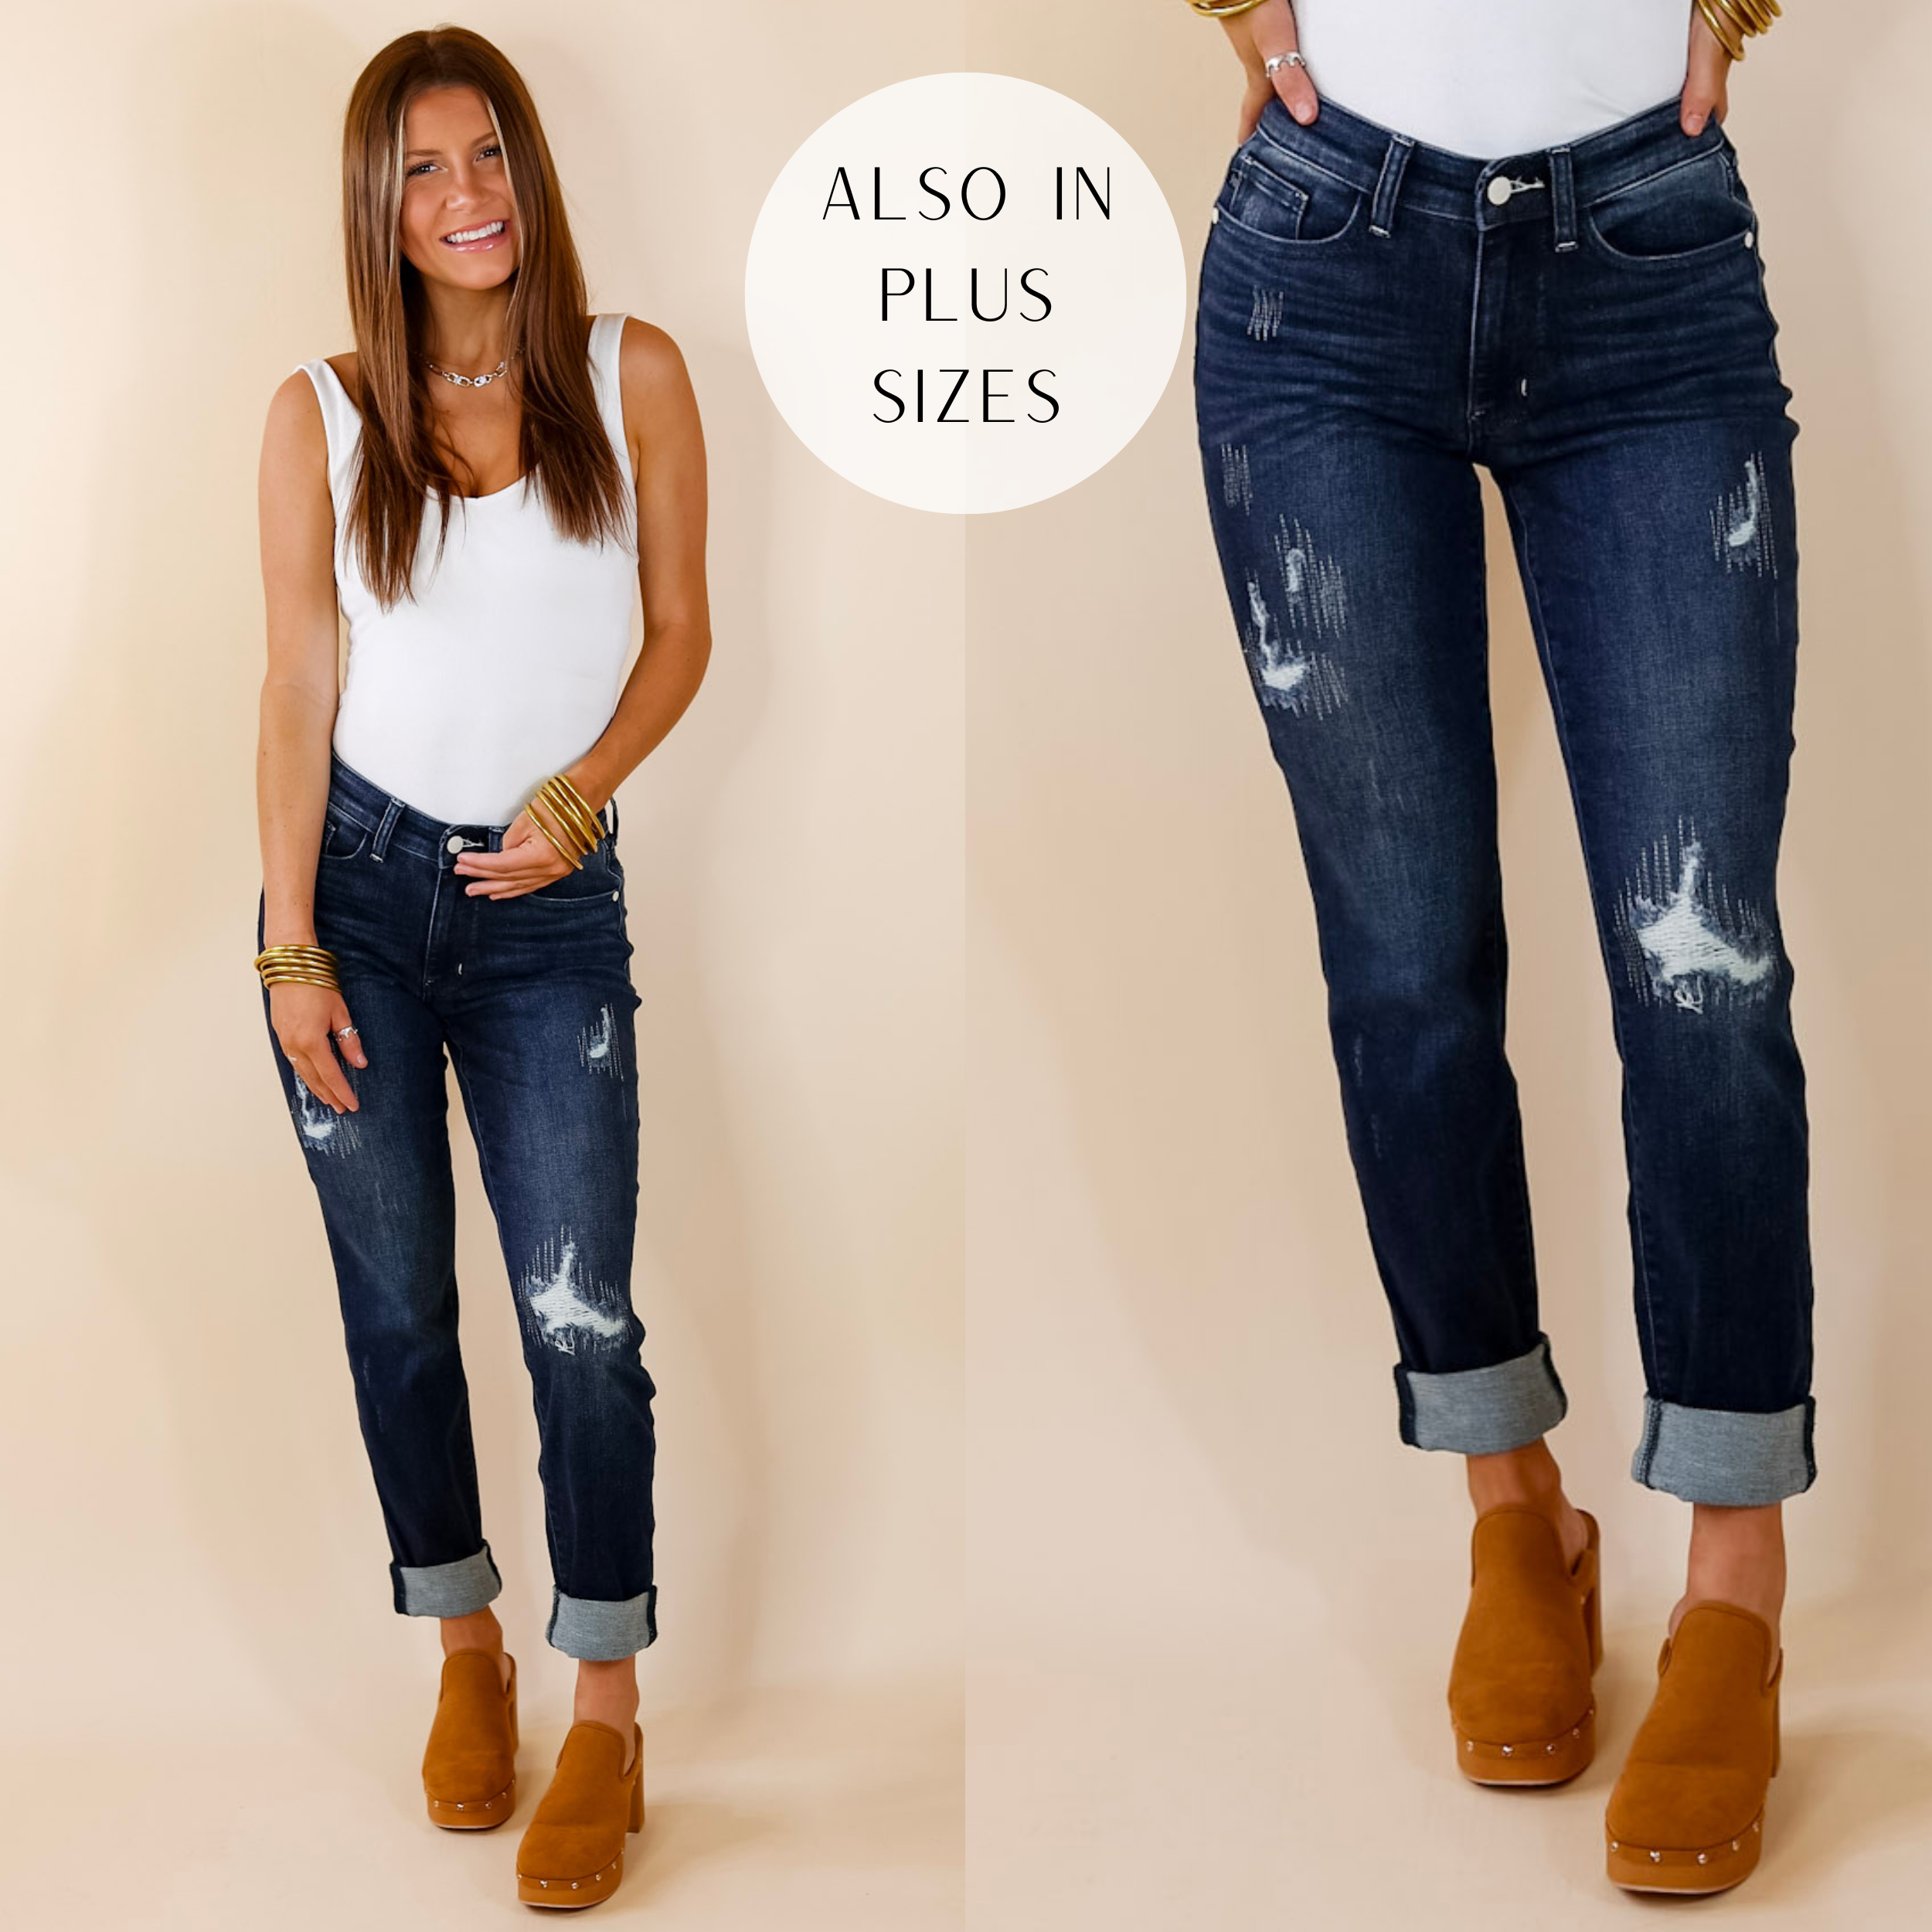 Model is wearing a pair of dark wash cuffed jeans with distressing. Model has these jeans paired with a white bodysuit, tan clogs, and gold jewelry.